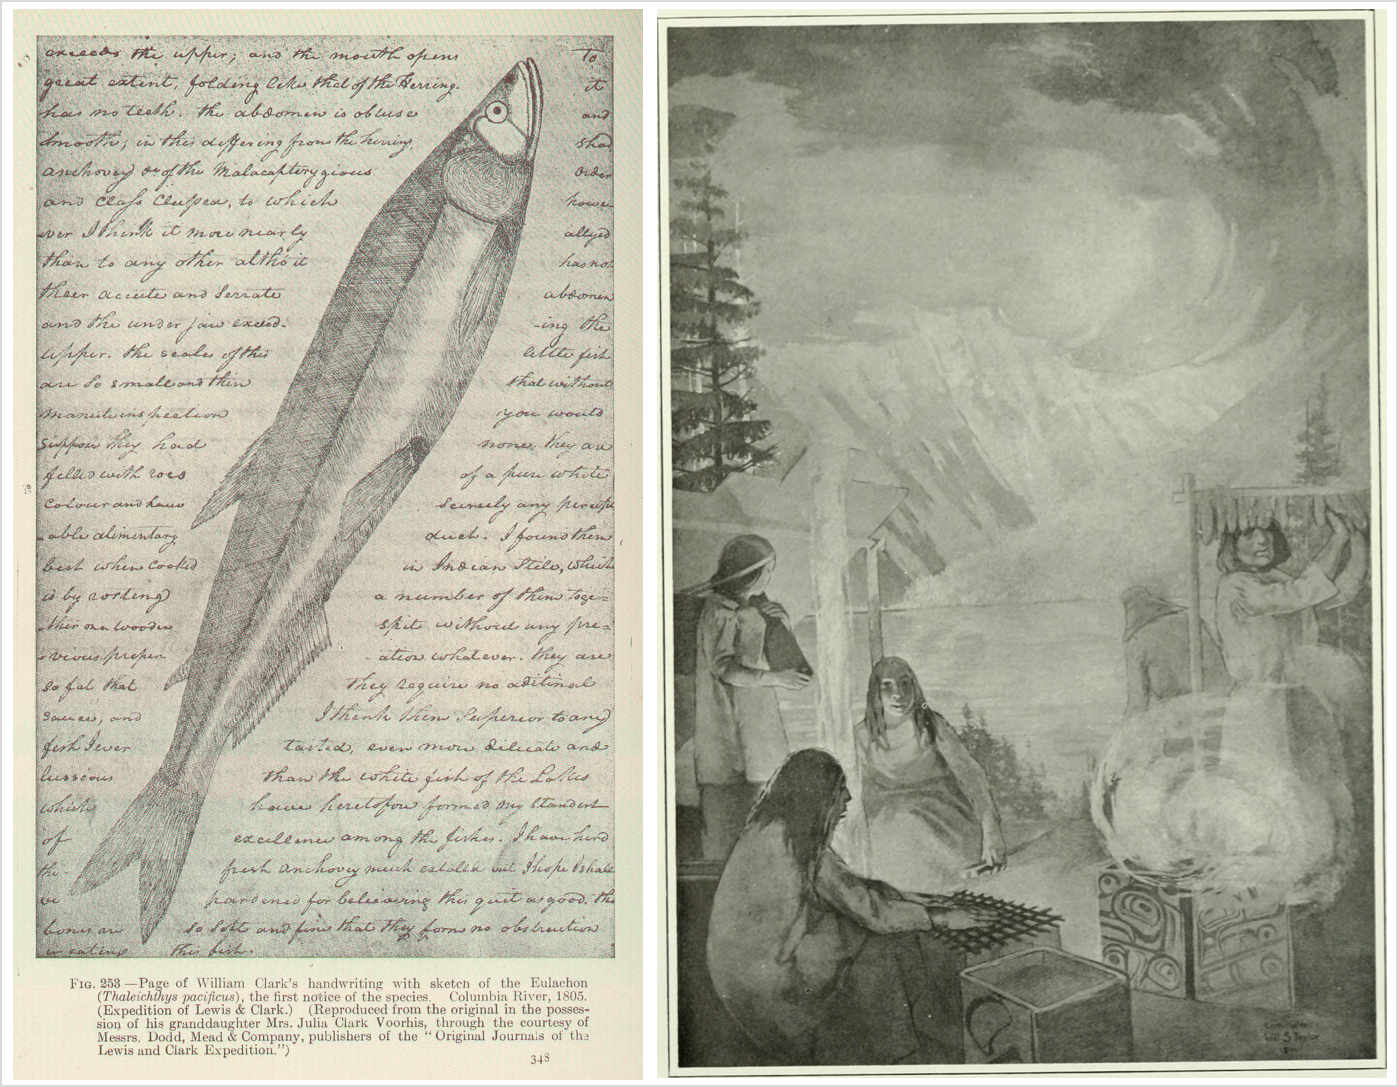 At left is a page from William Clark's journal, showing his handwritten entry and a large sketch, which appears to be made in pencil, of a eulachon smelt stretching diagonally across the page. At right, a black-and-white drawing or etching of a Tsimshian family making eulachon butter, showing family members working together on the bank of a river with tall trees and mountains framing the image.